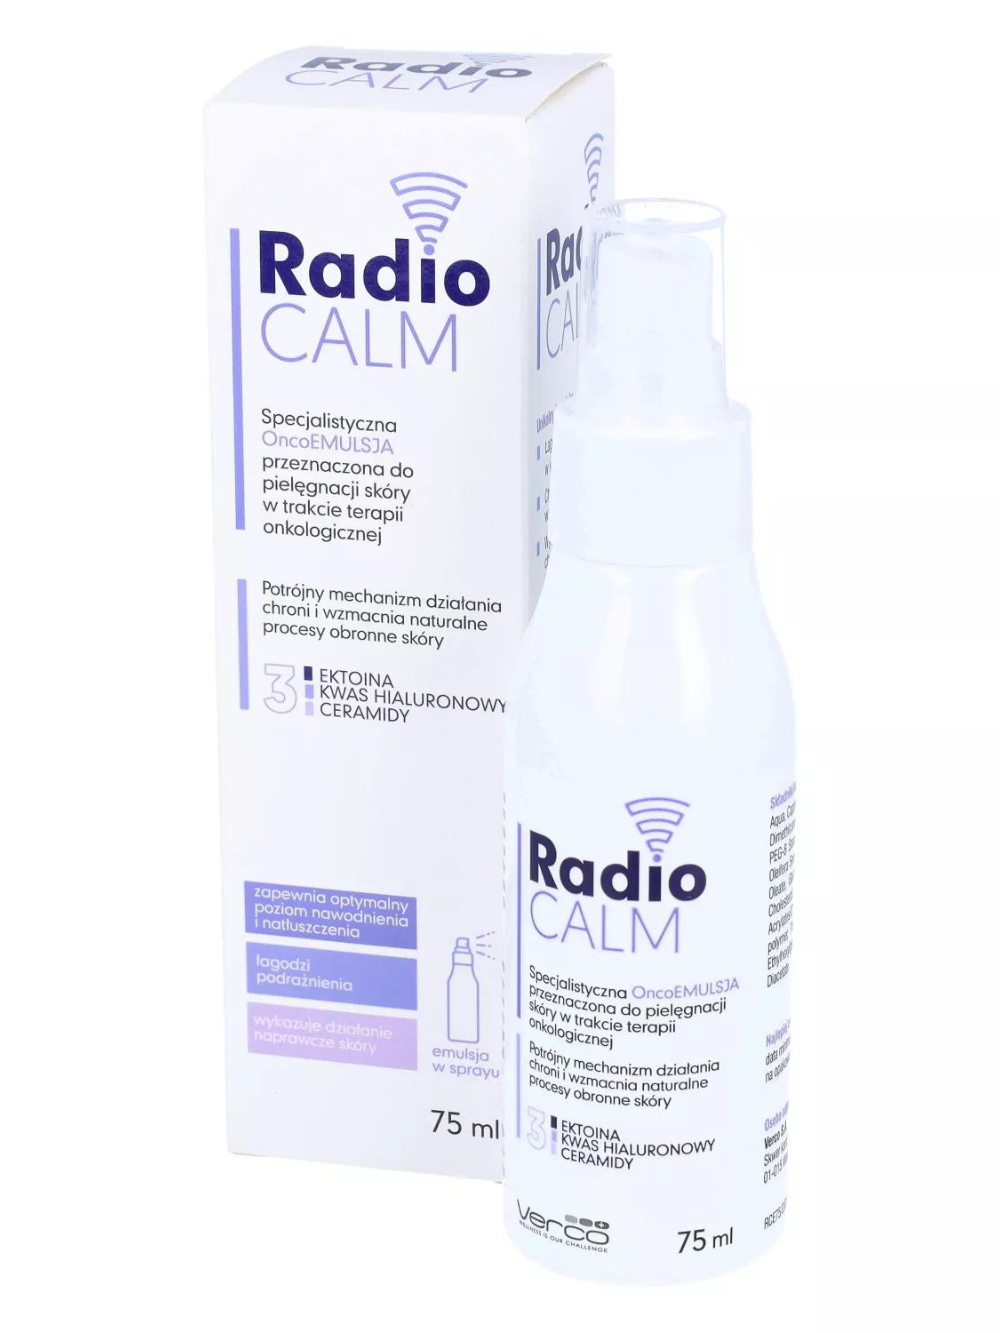 Cream after radiotherapy - emulsion - Polish online store